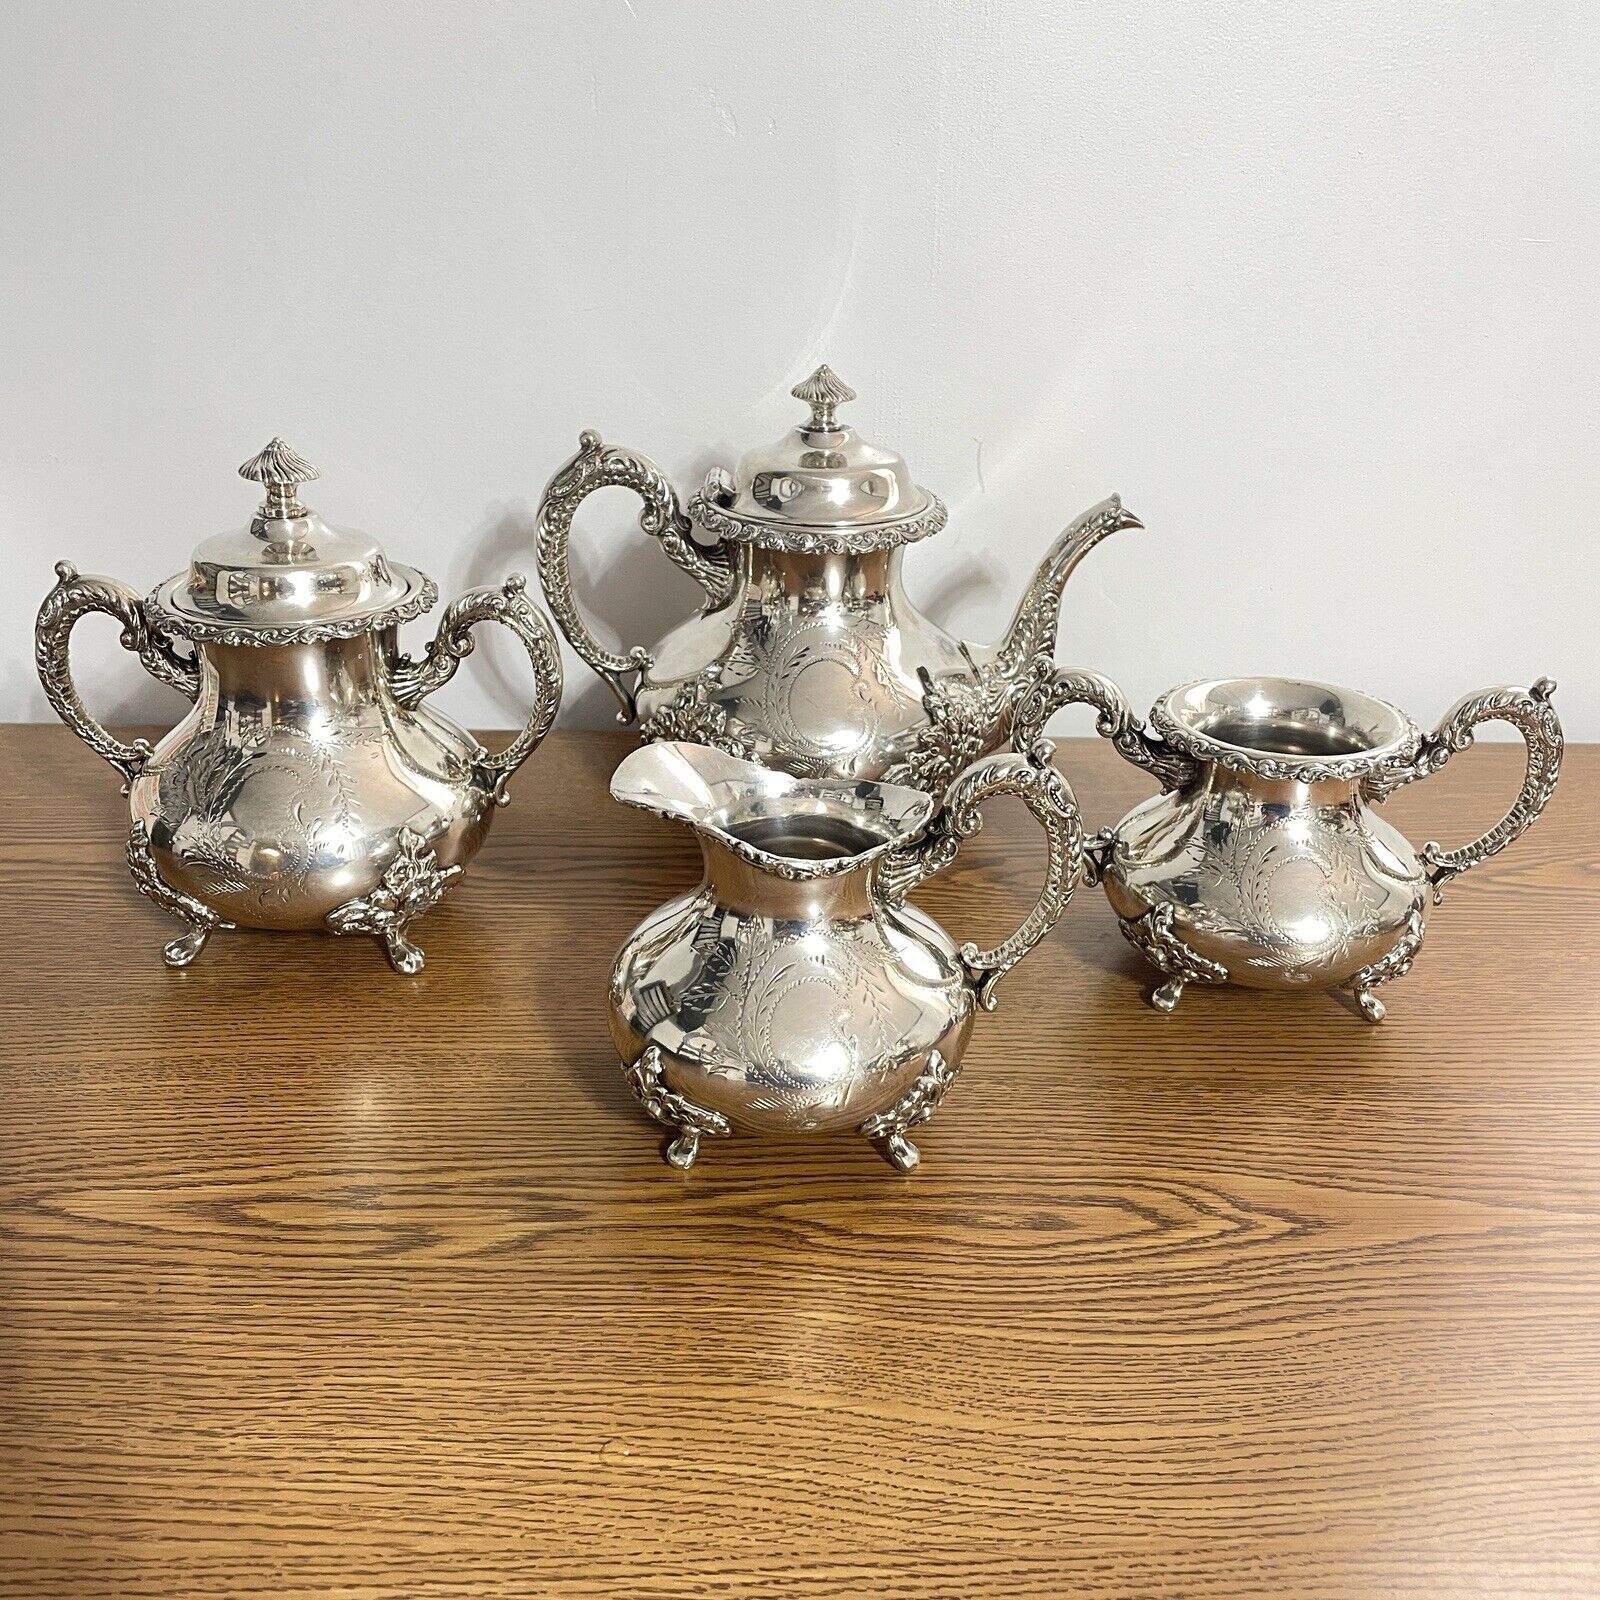 Antique Forbes Silver Co Vintage Tea Set 4-Piece Silverplate #962 Ornate Etched